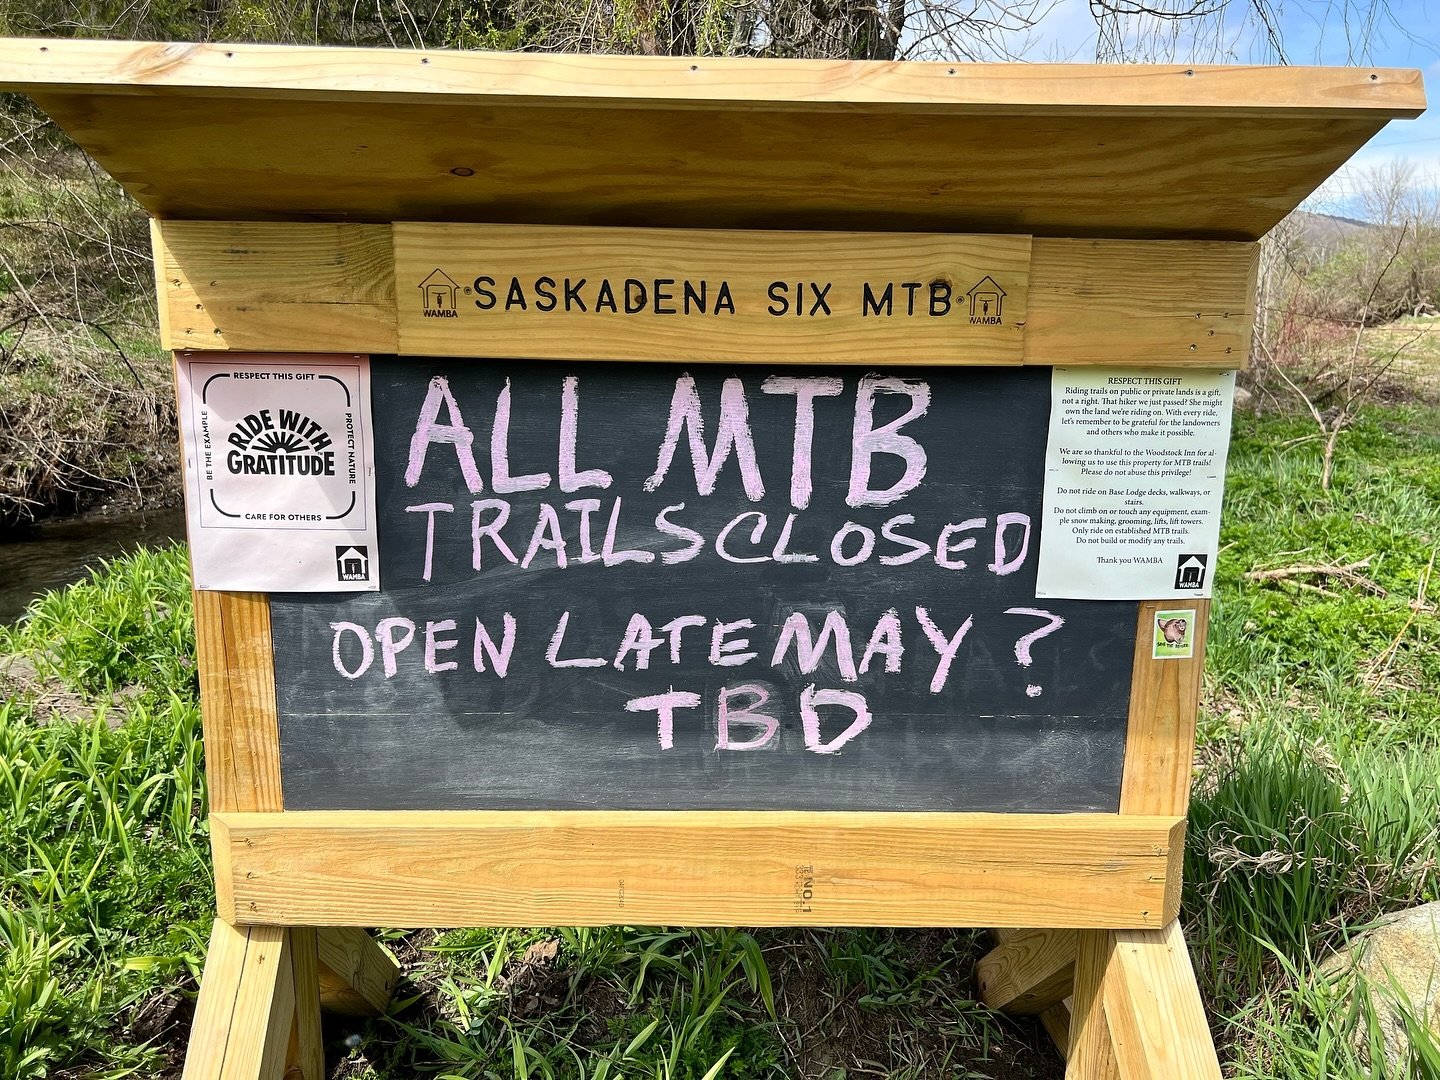 #saskadenasixskiarea all MTB trails closed. Will update when we have an opening date. Peg and Aqueduct are open!
@vmba802 #vmba802